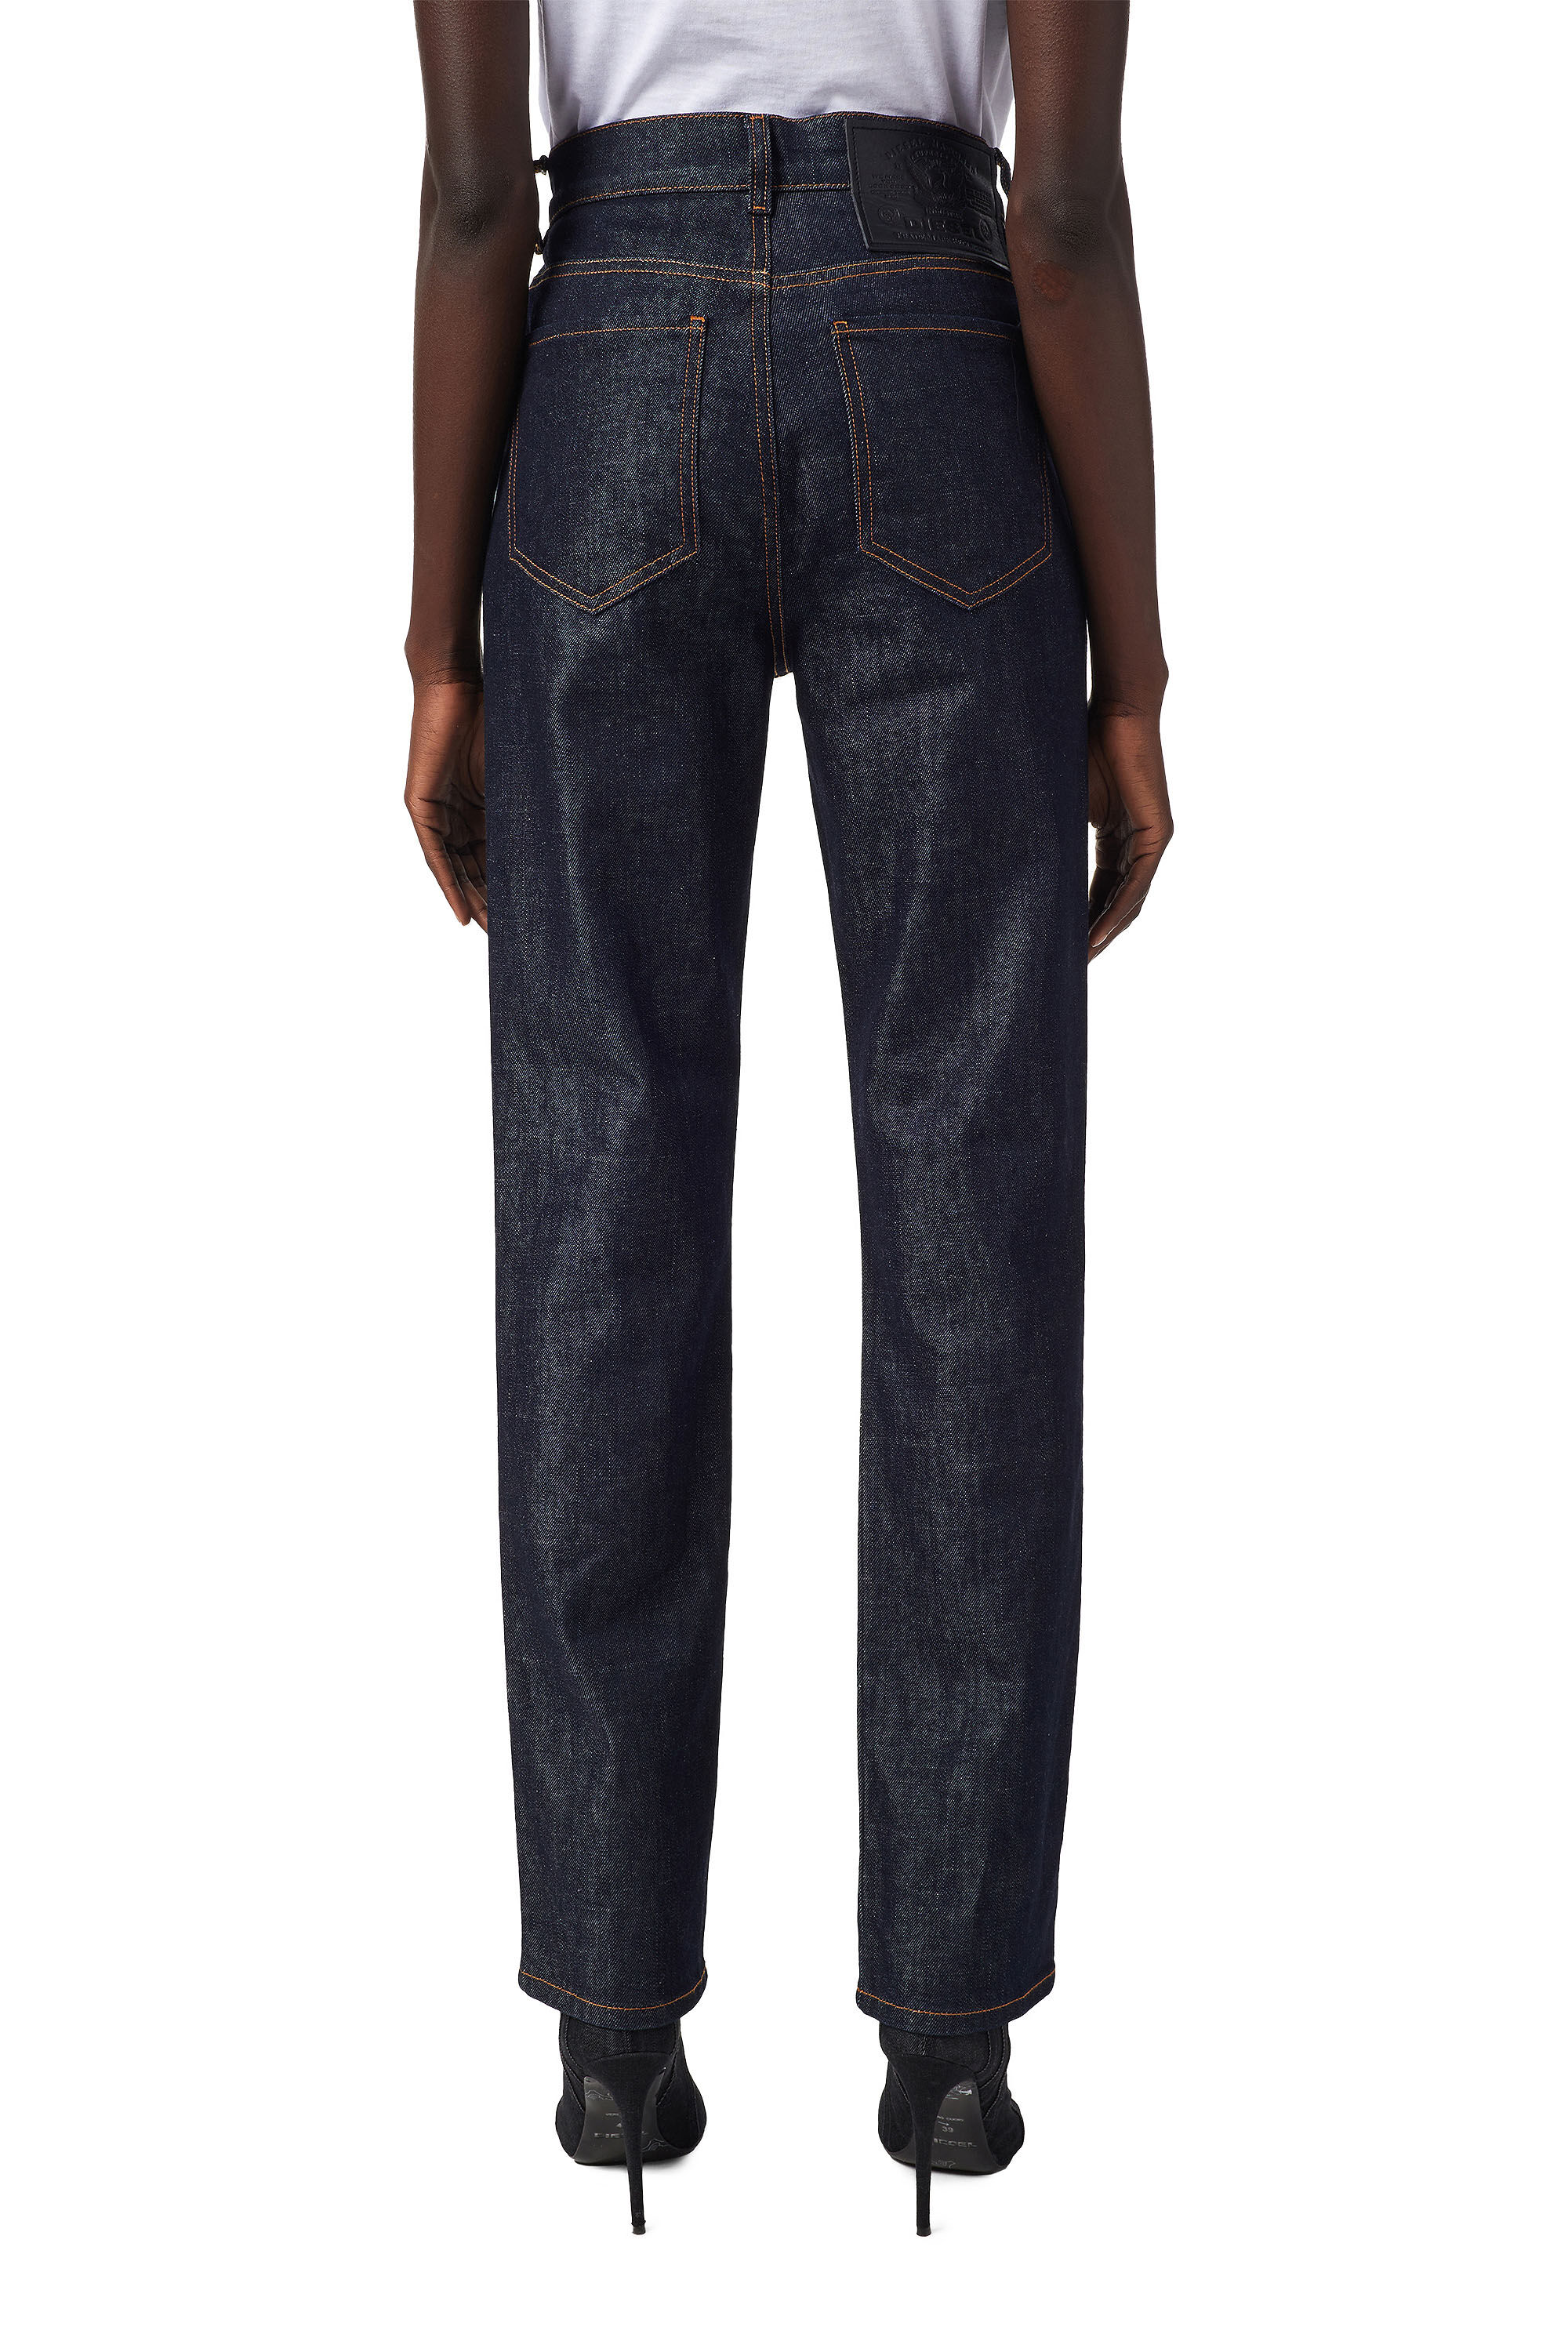 Diesel - D-Arcy 09B39 Straight Jeans,  - Image 5